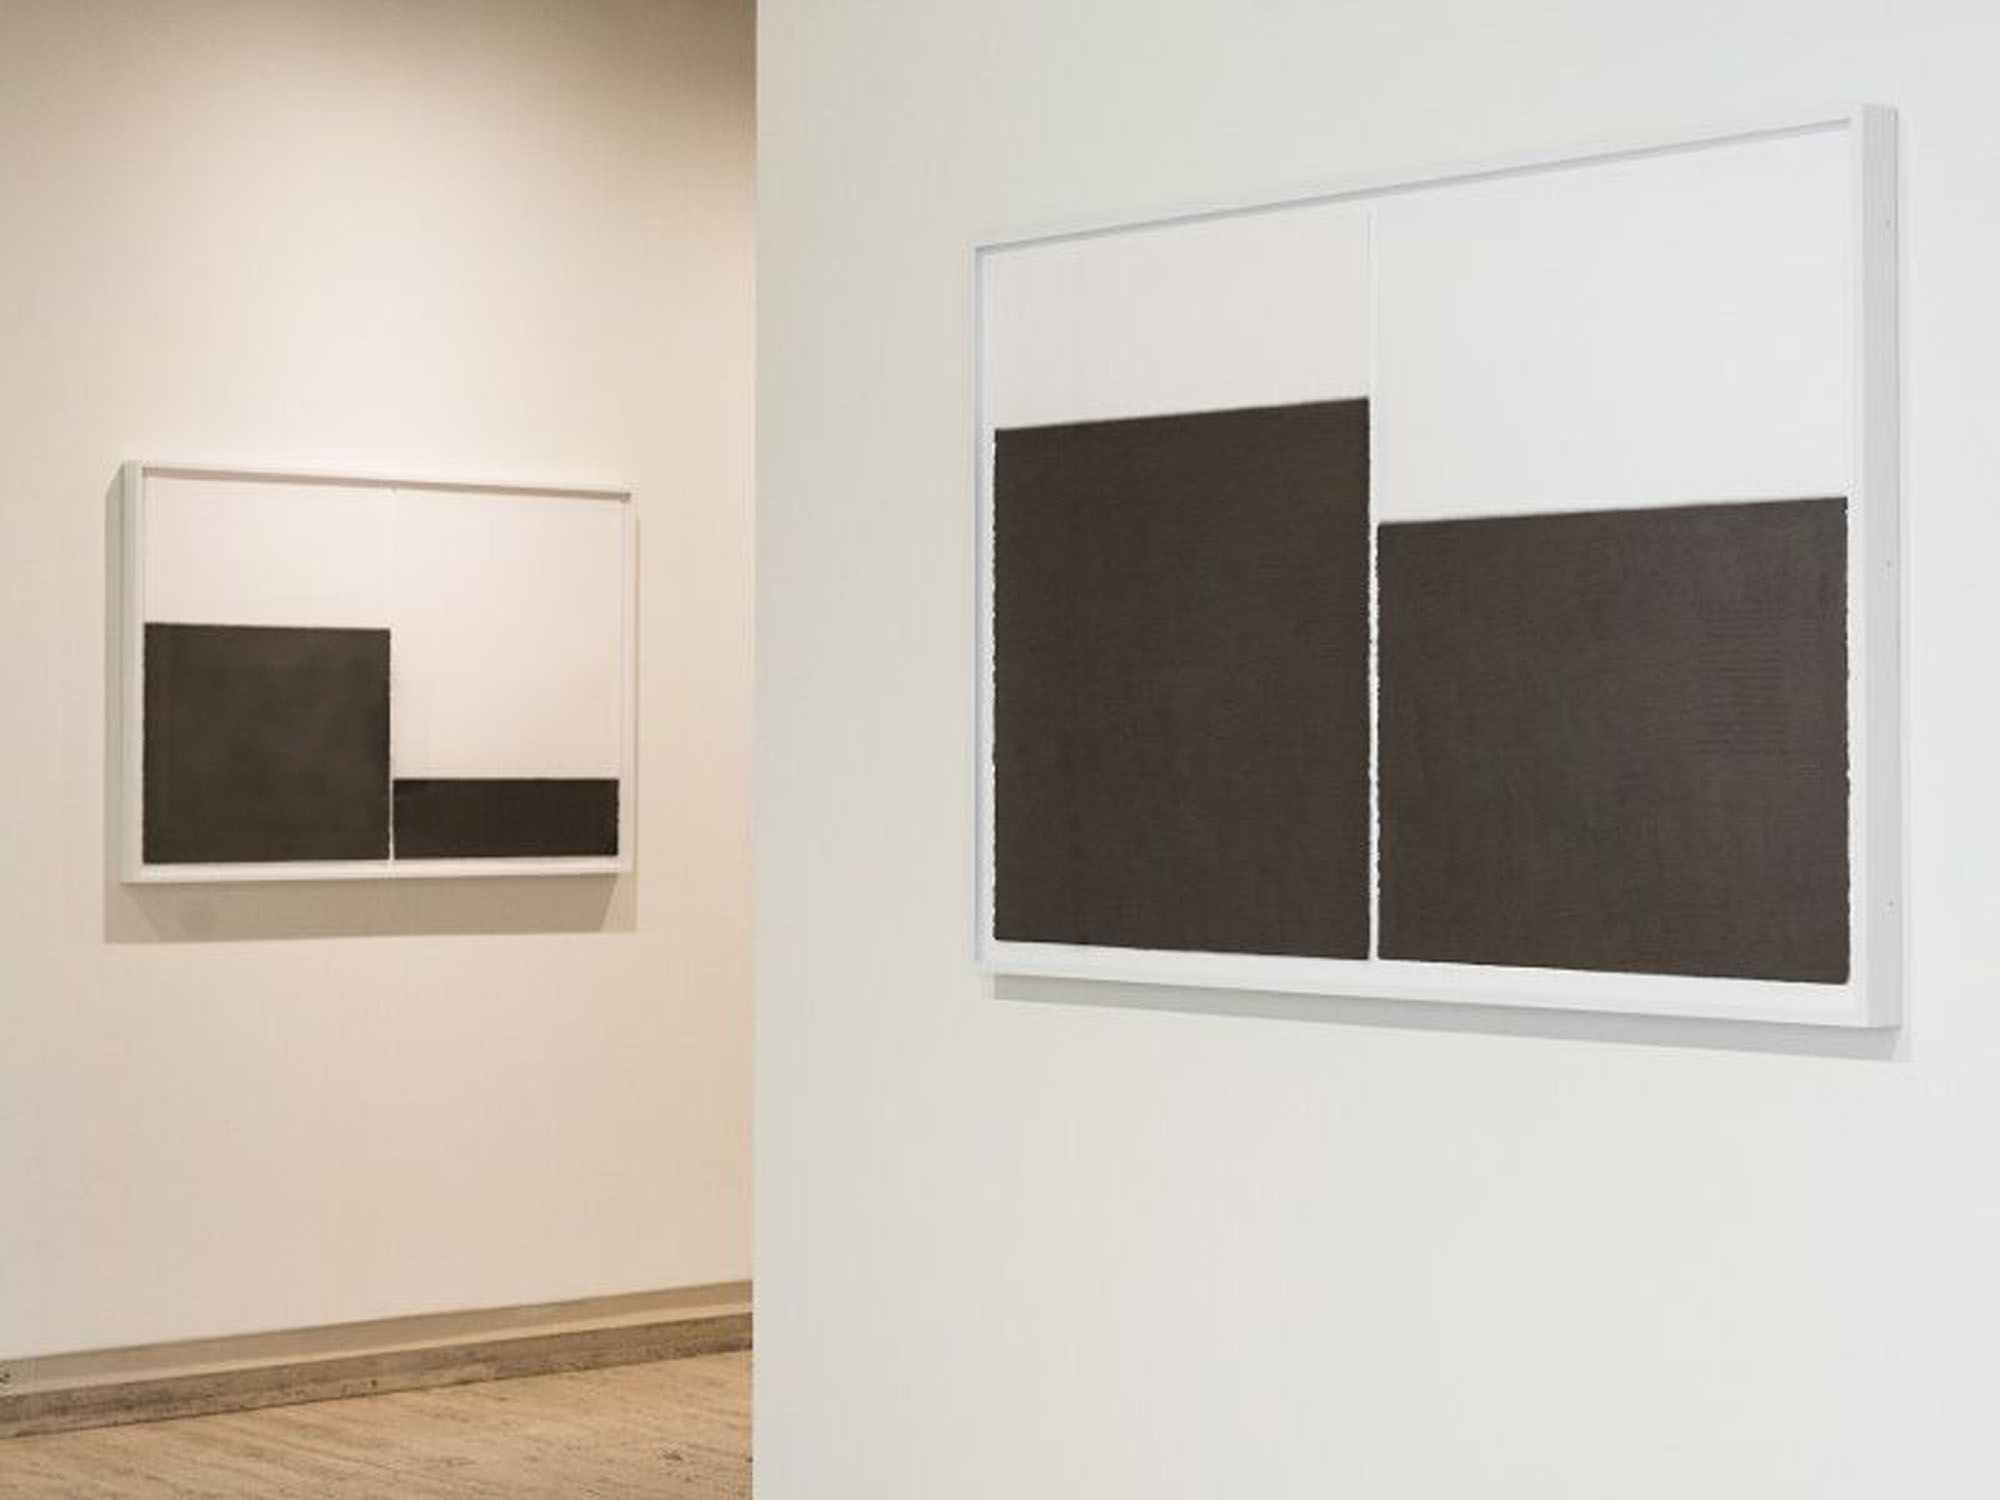   Unfolding Center no.5, 2016 (right)  Graphite pencil on paper,&nbsp;30” x 44” (paper size)  Photo: Courtesy of Sheldon Museum of Art 